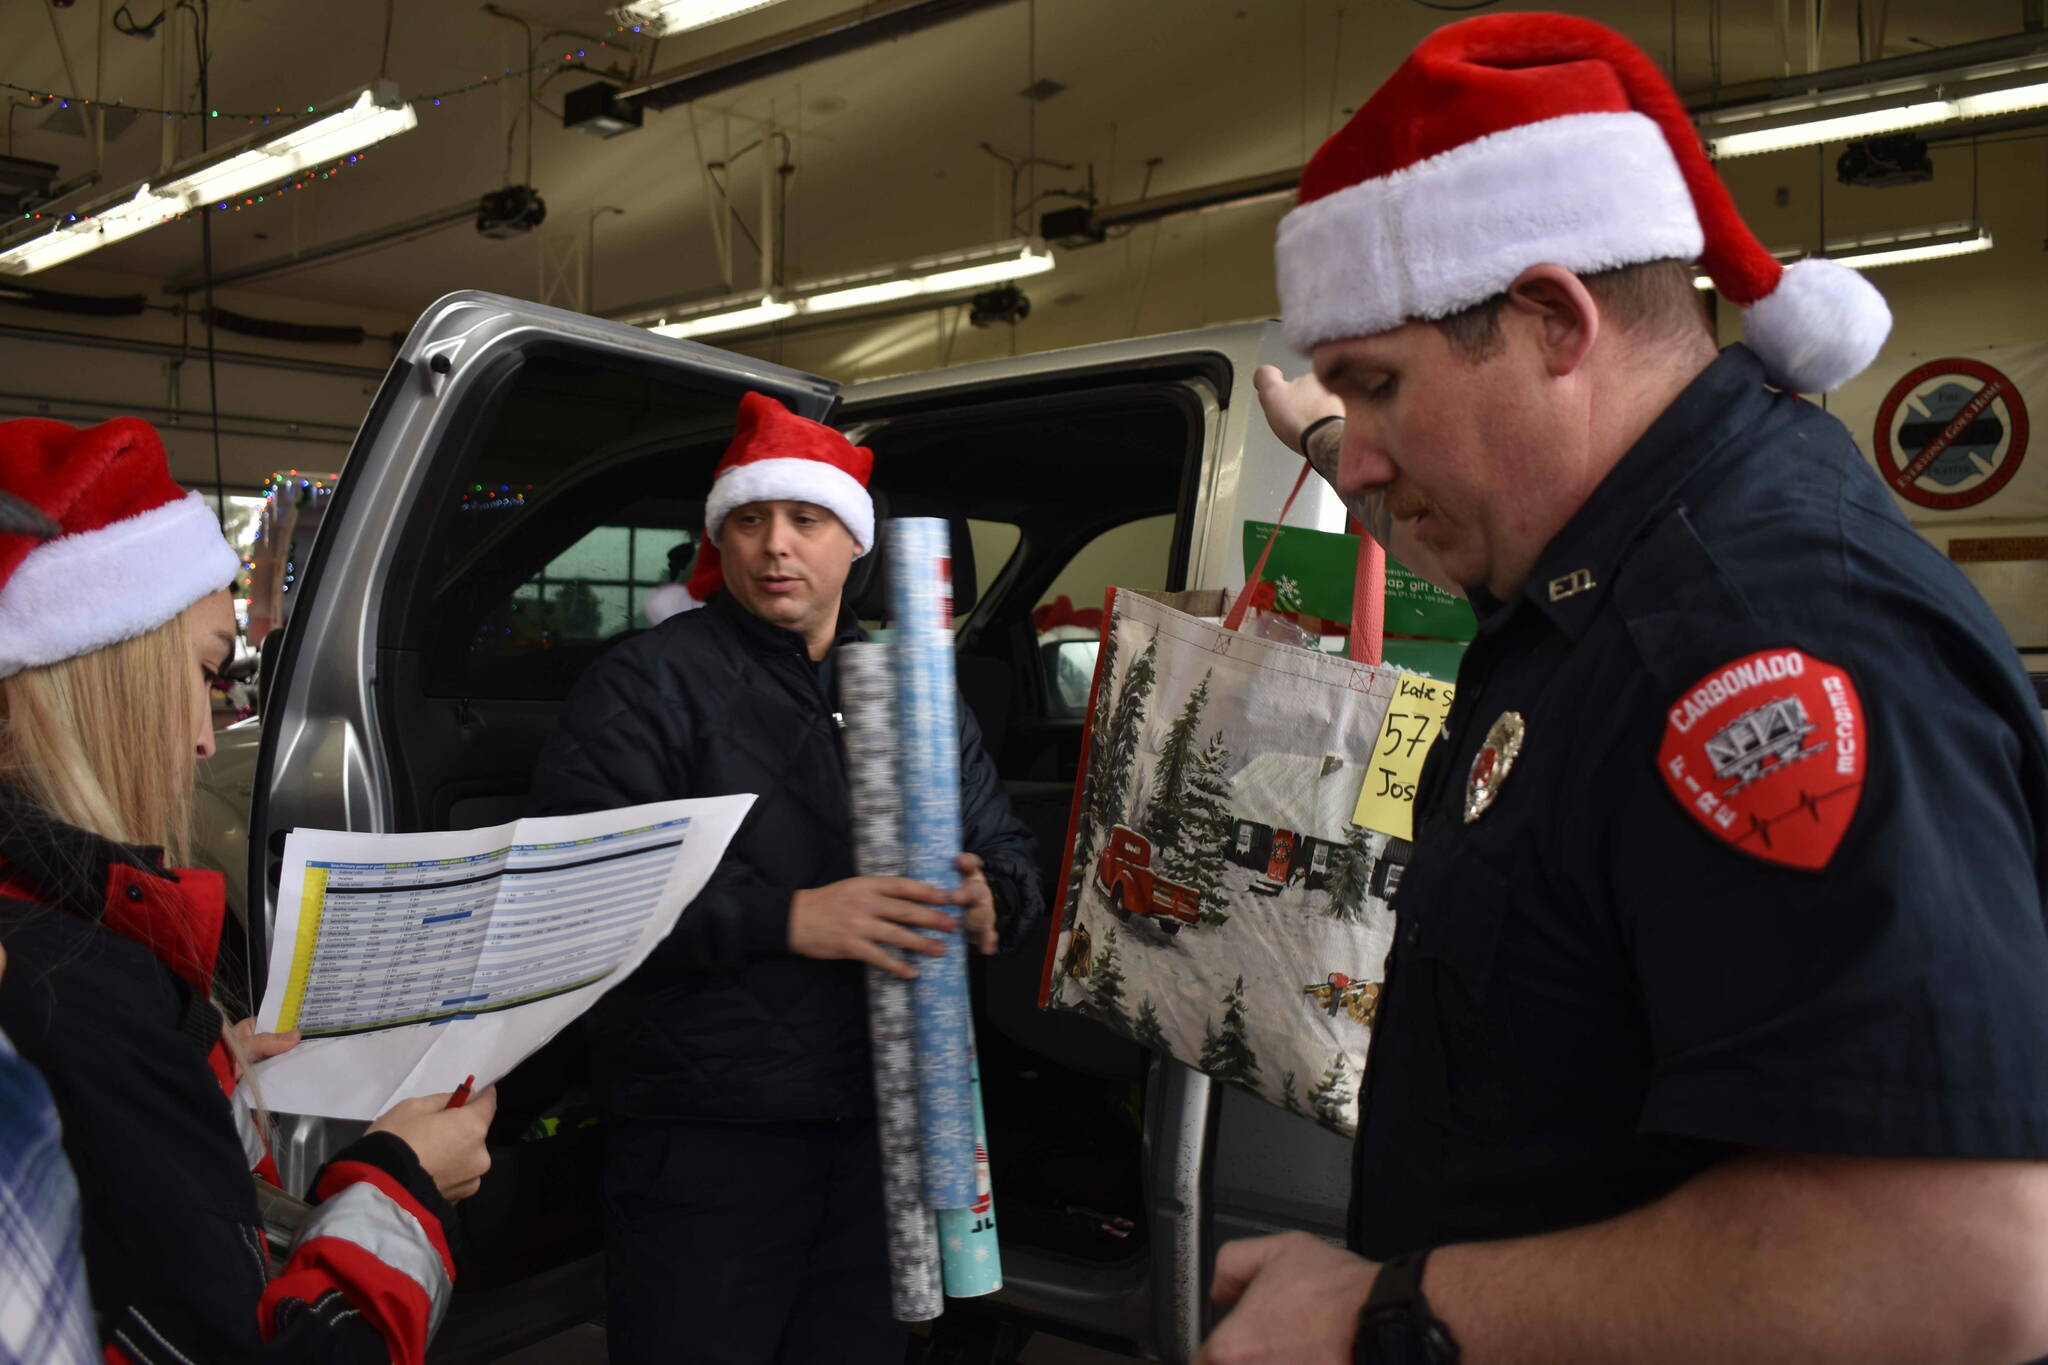 Buckley firefighters check the names on their ‘Nice’ list while loading gifts. Photo by Alex Bruell